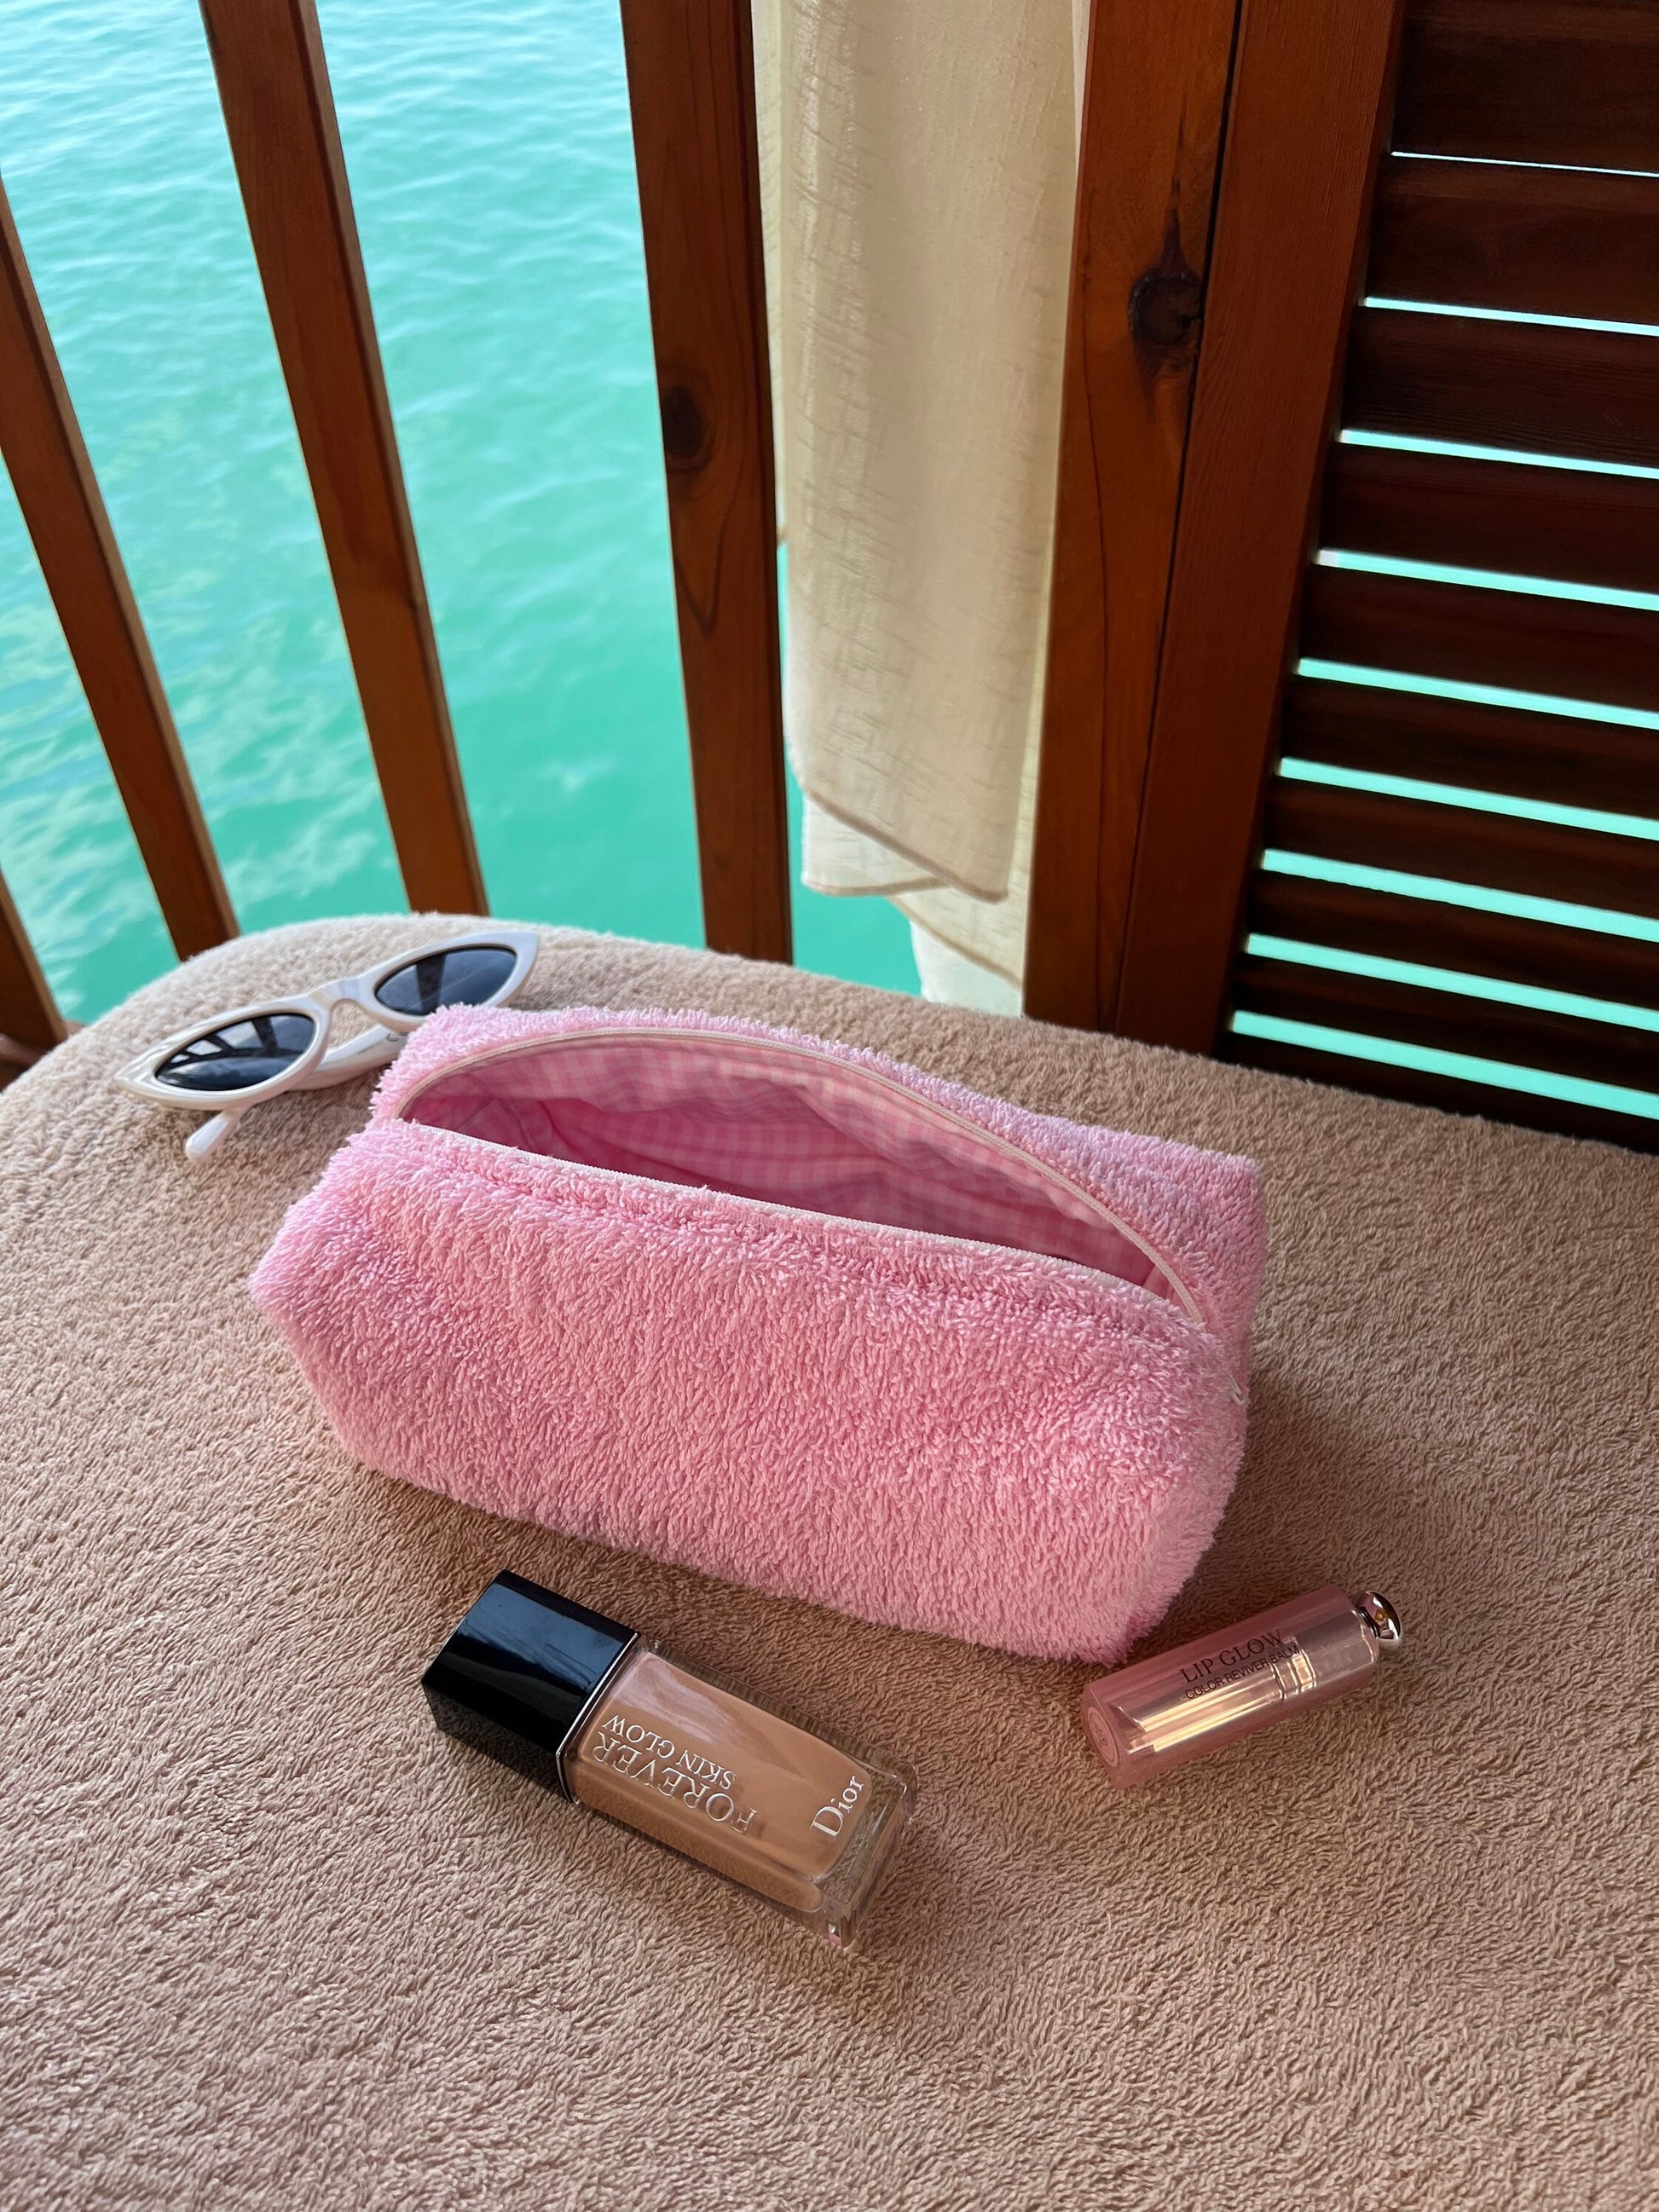 TOWELLING MAKEUP BAG medium pink towel fluffy cosmetic bag with pink gingham, cotton zip-up pouch, make-up bag handmade in U.K.